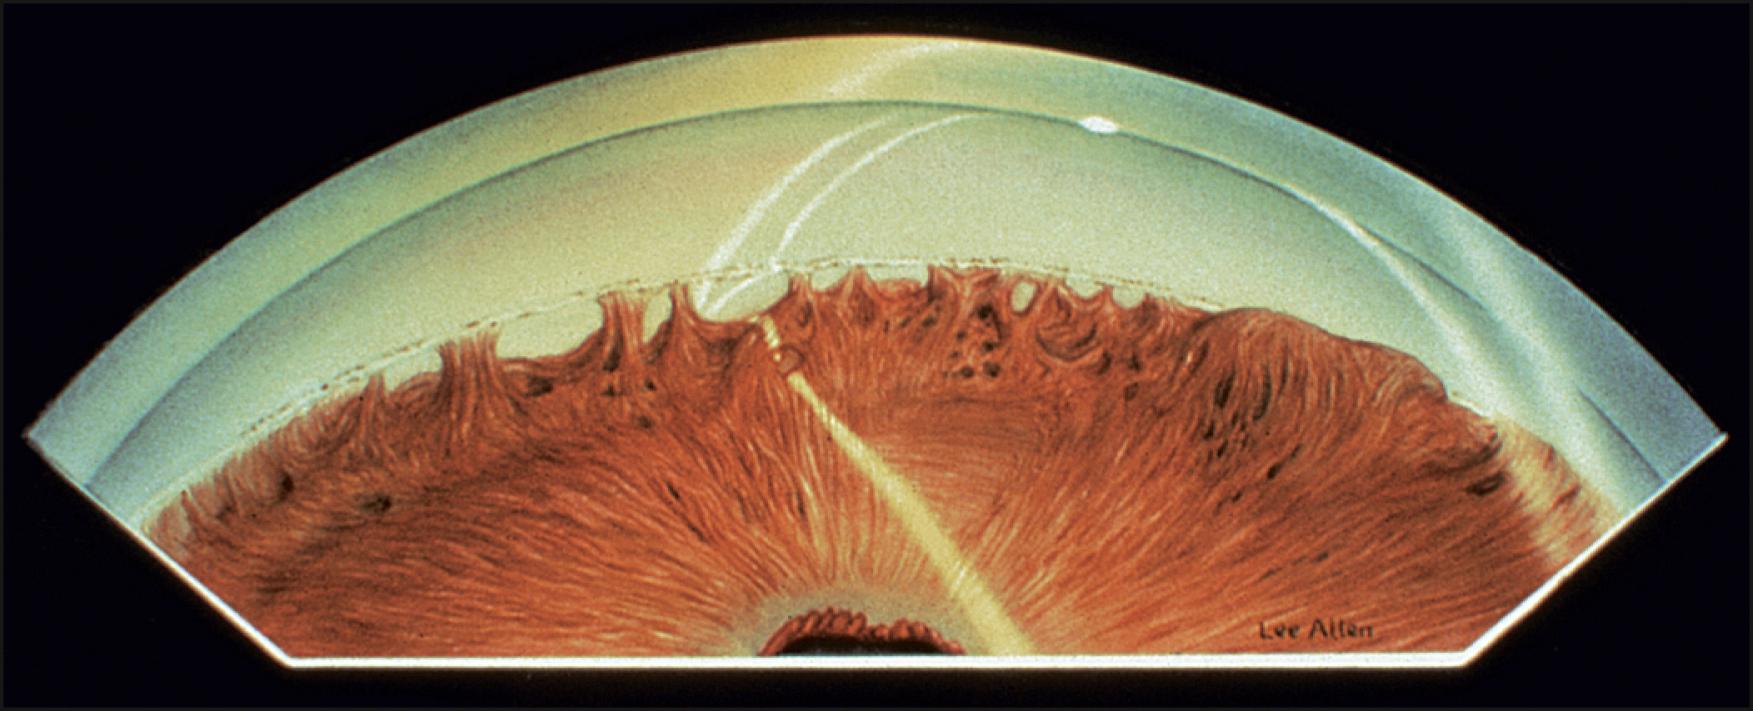 Fig. 56.4, The iris processes in this patient with Axenfeld-Rieger syndrome are much denser and more confluent than those seen in Fig. 56.3 . They cover much of the trabecular meshwork.